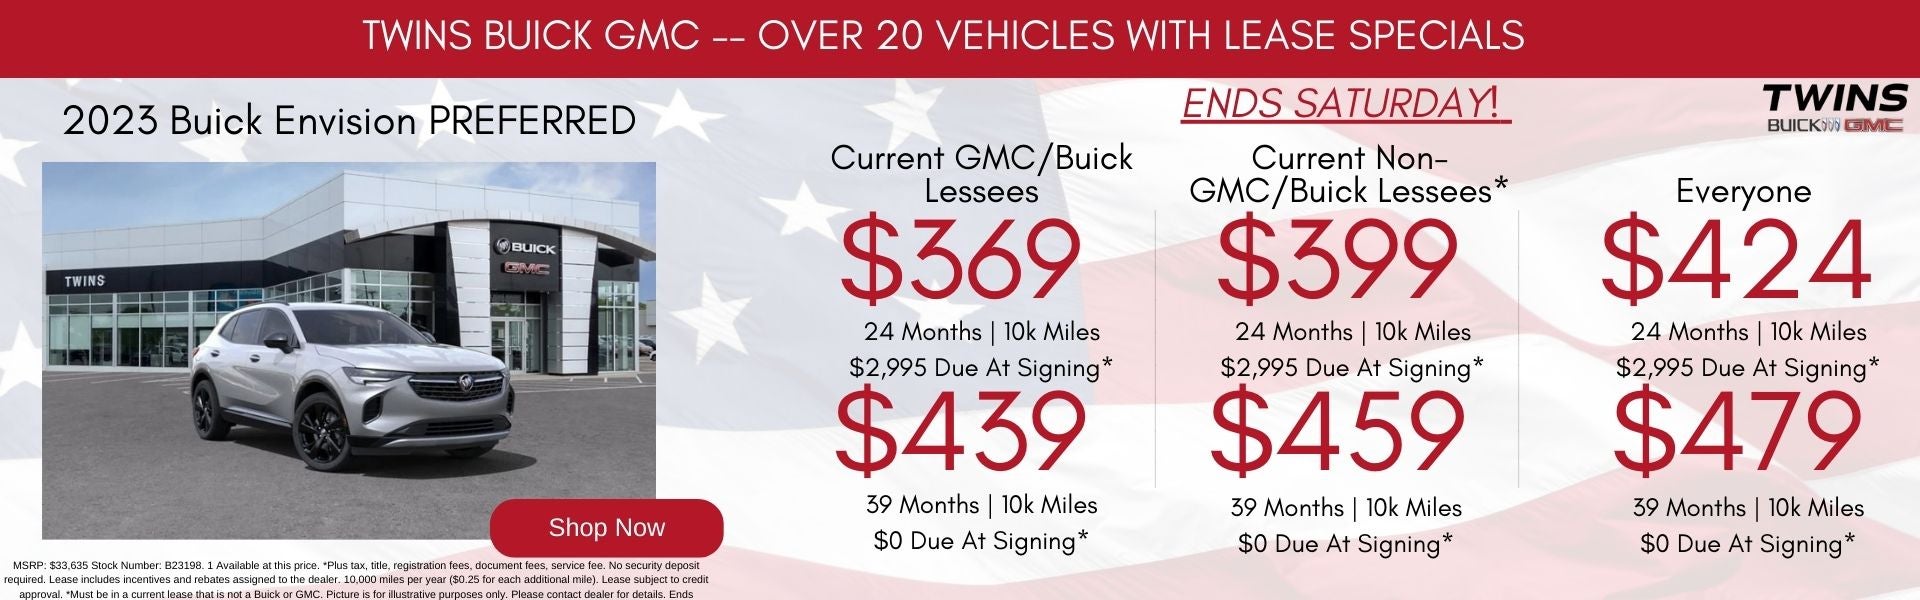 Buick Envision Lease Special